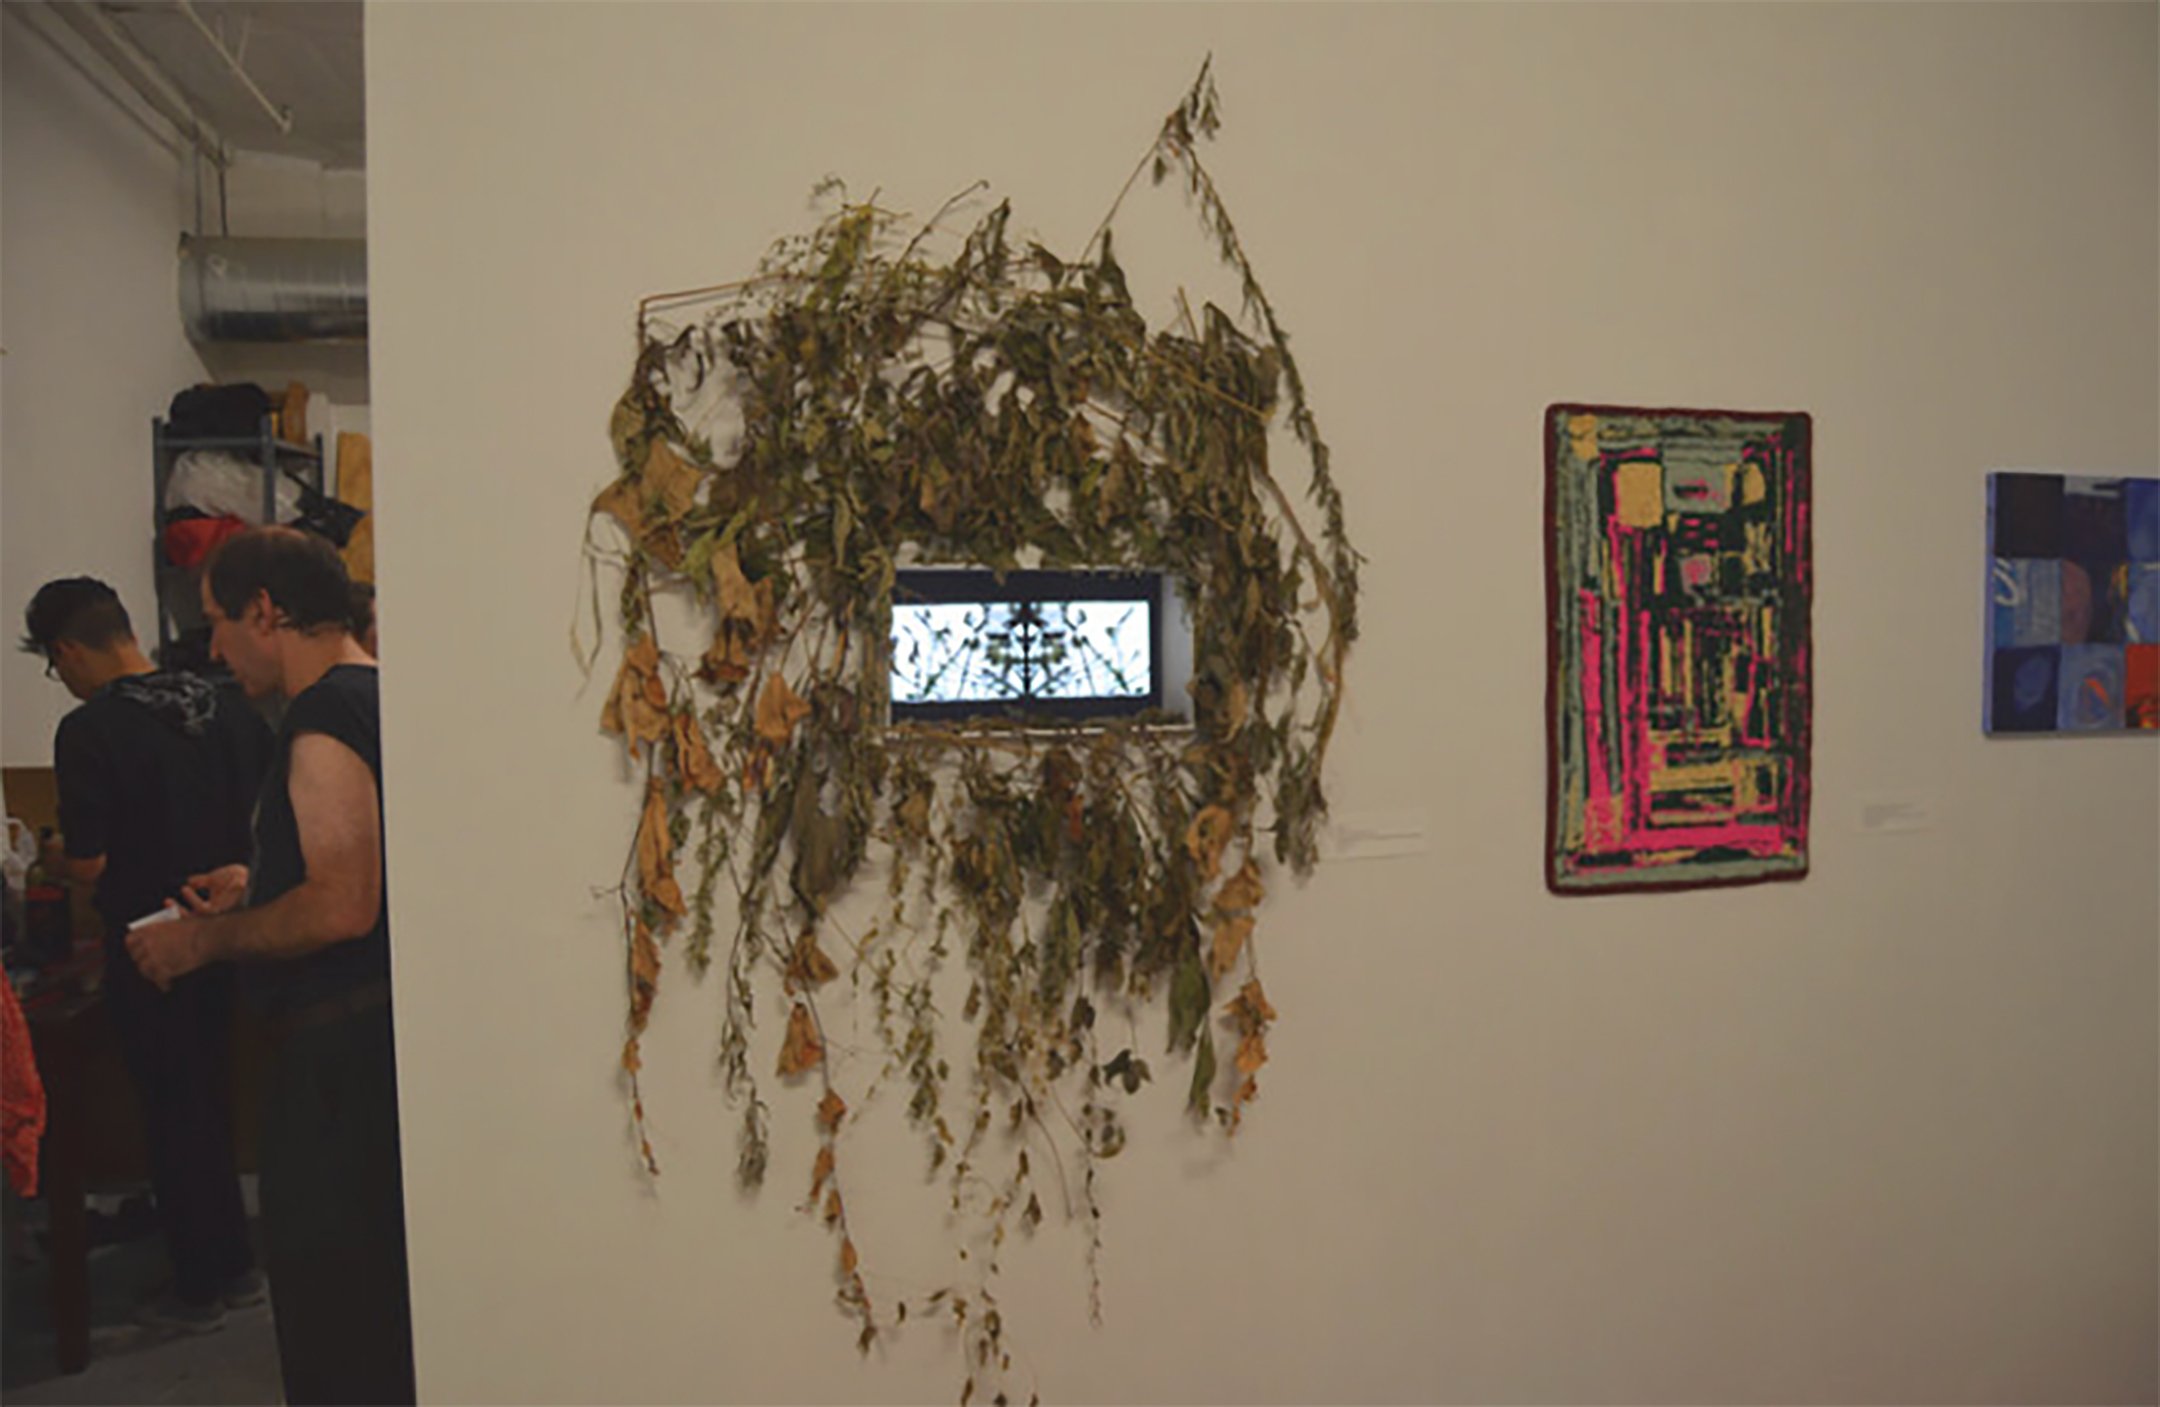 <I>2012-2013 side by side</> installed at U.S.S. Gallery Nomadic Projects 